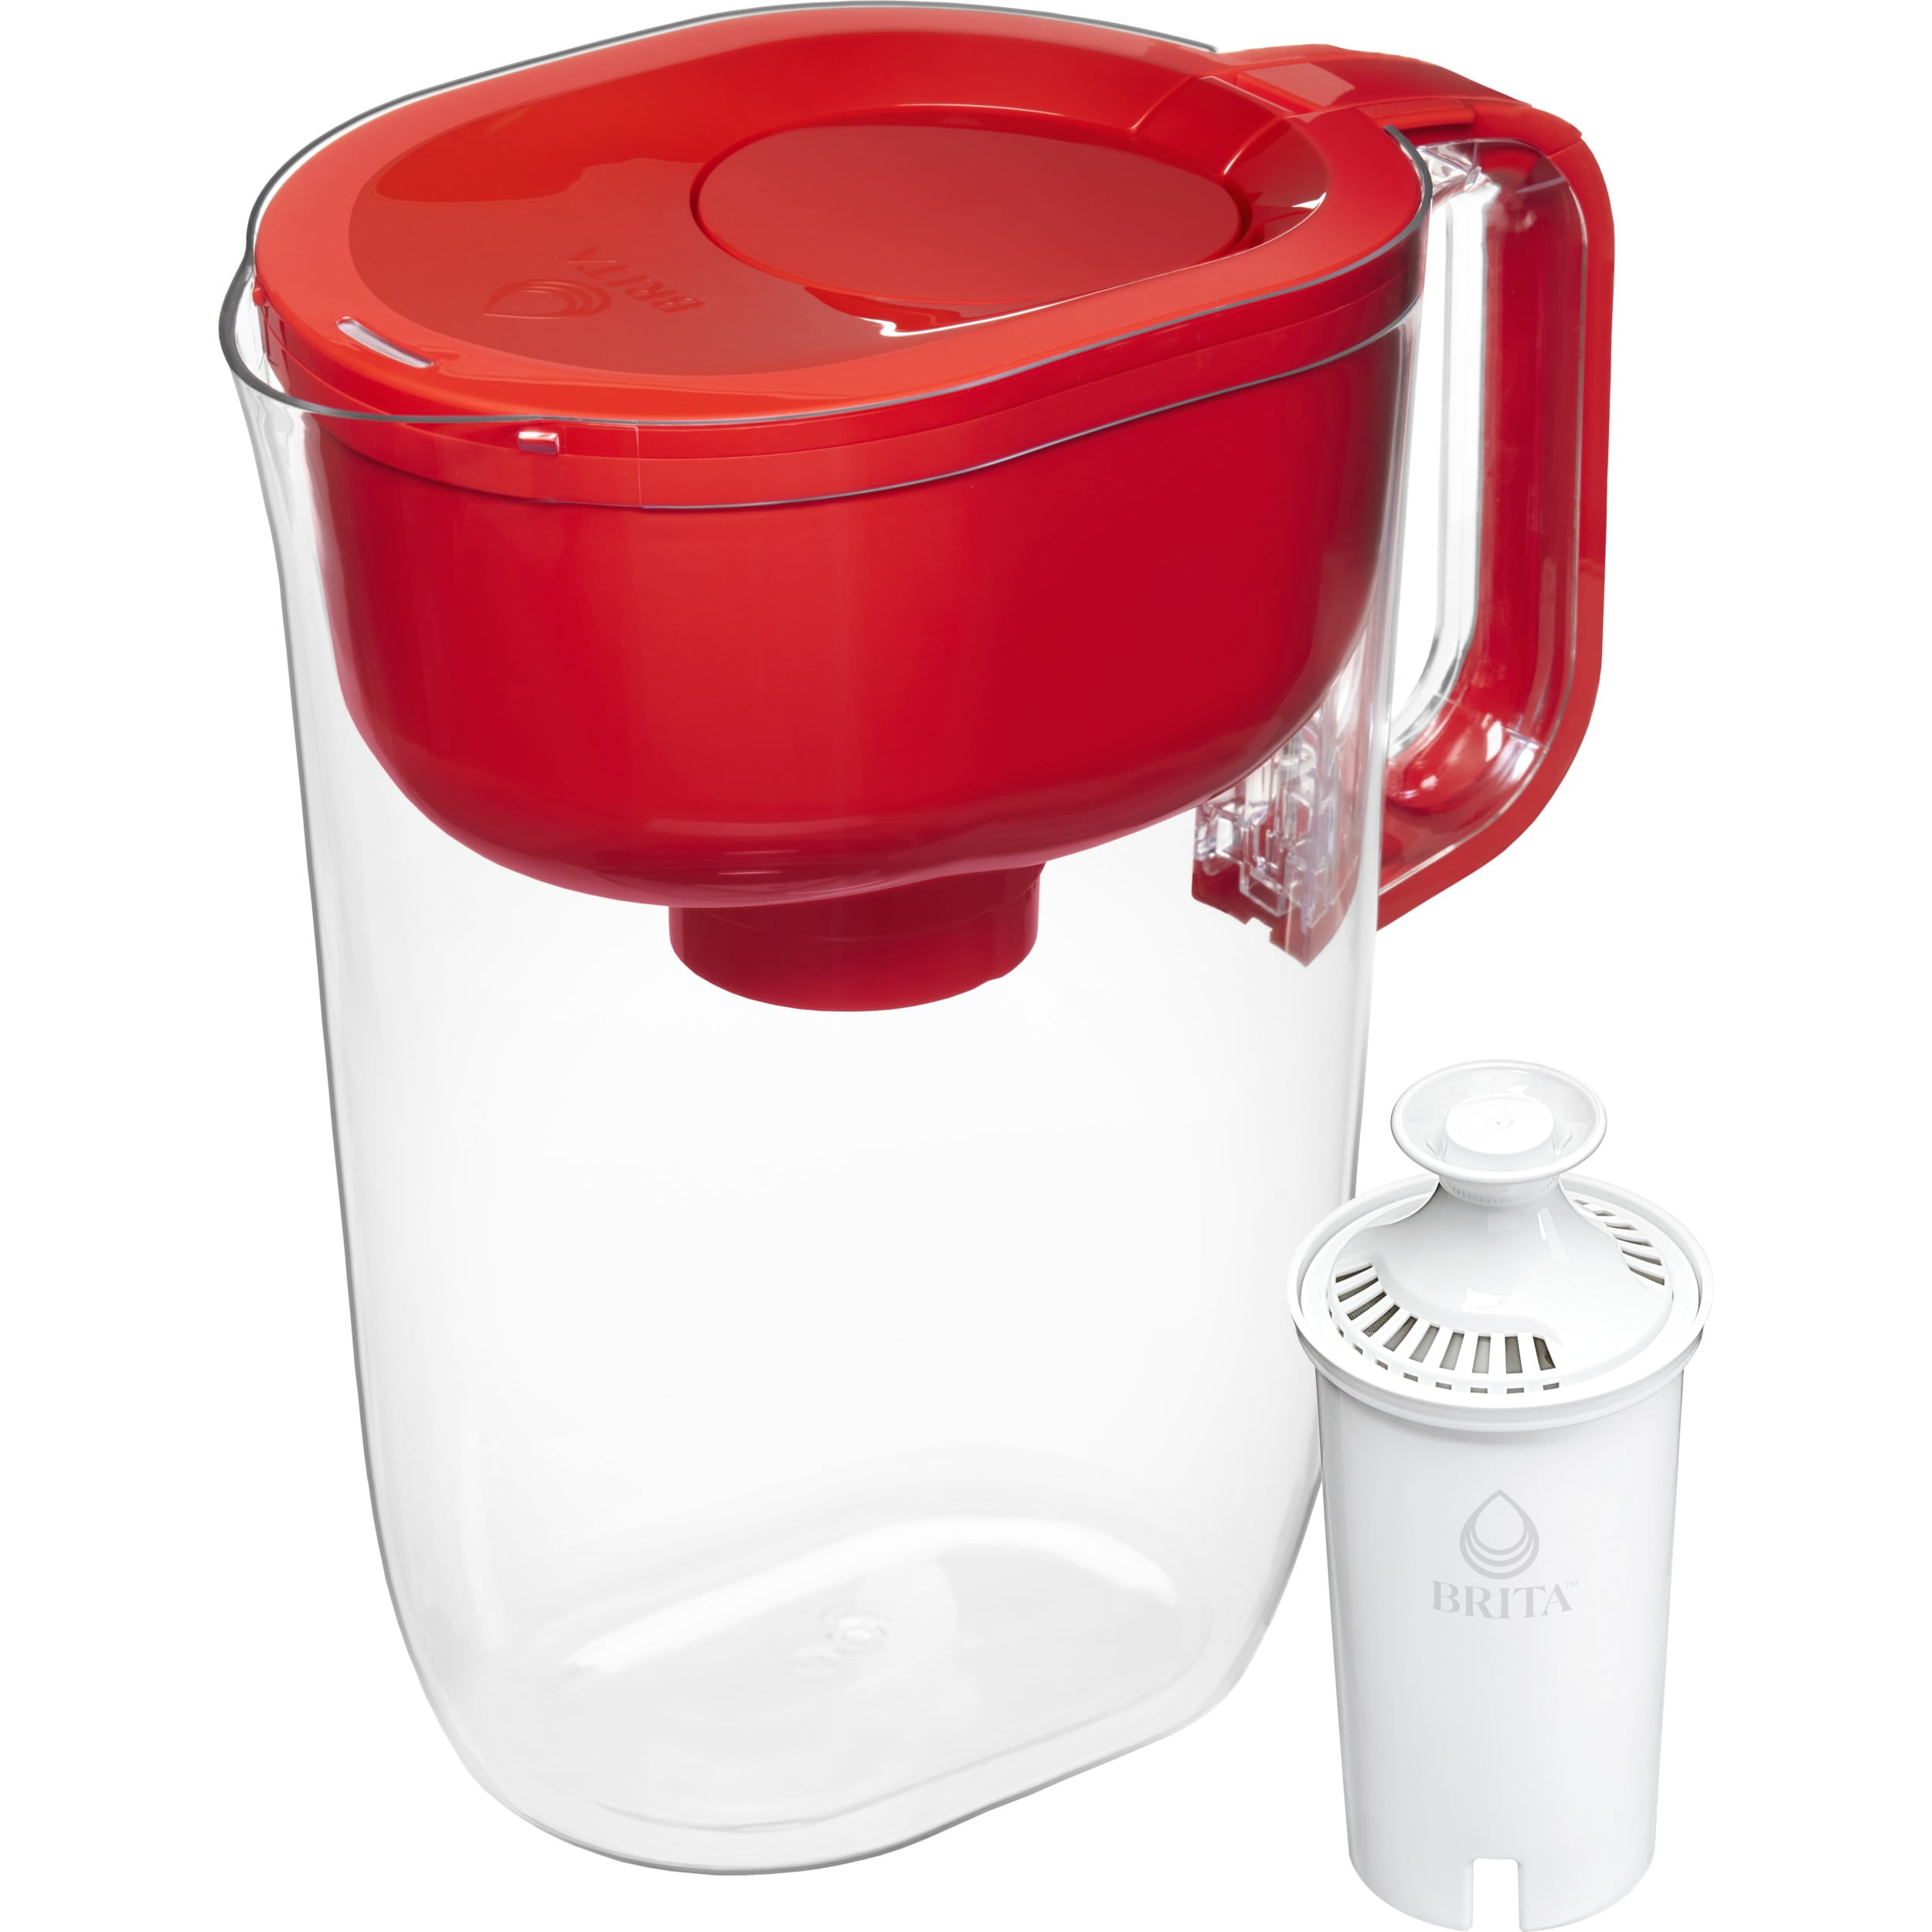 LUCY® Filter Carafe - Get your water filter carafe